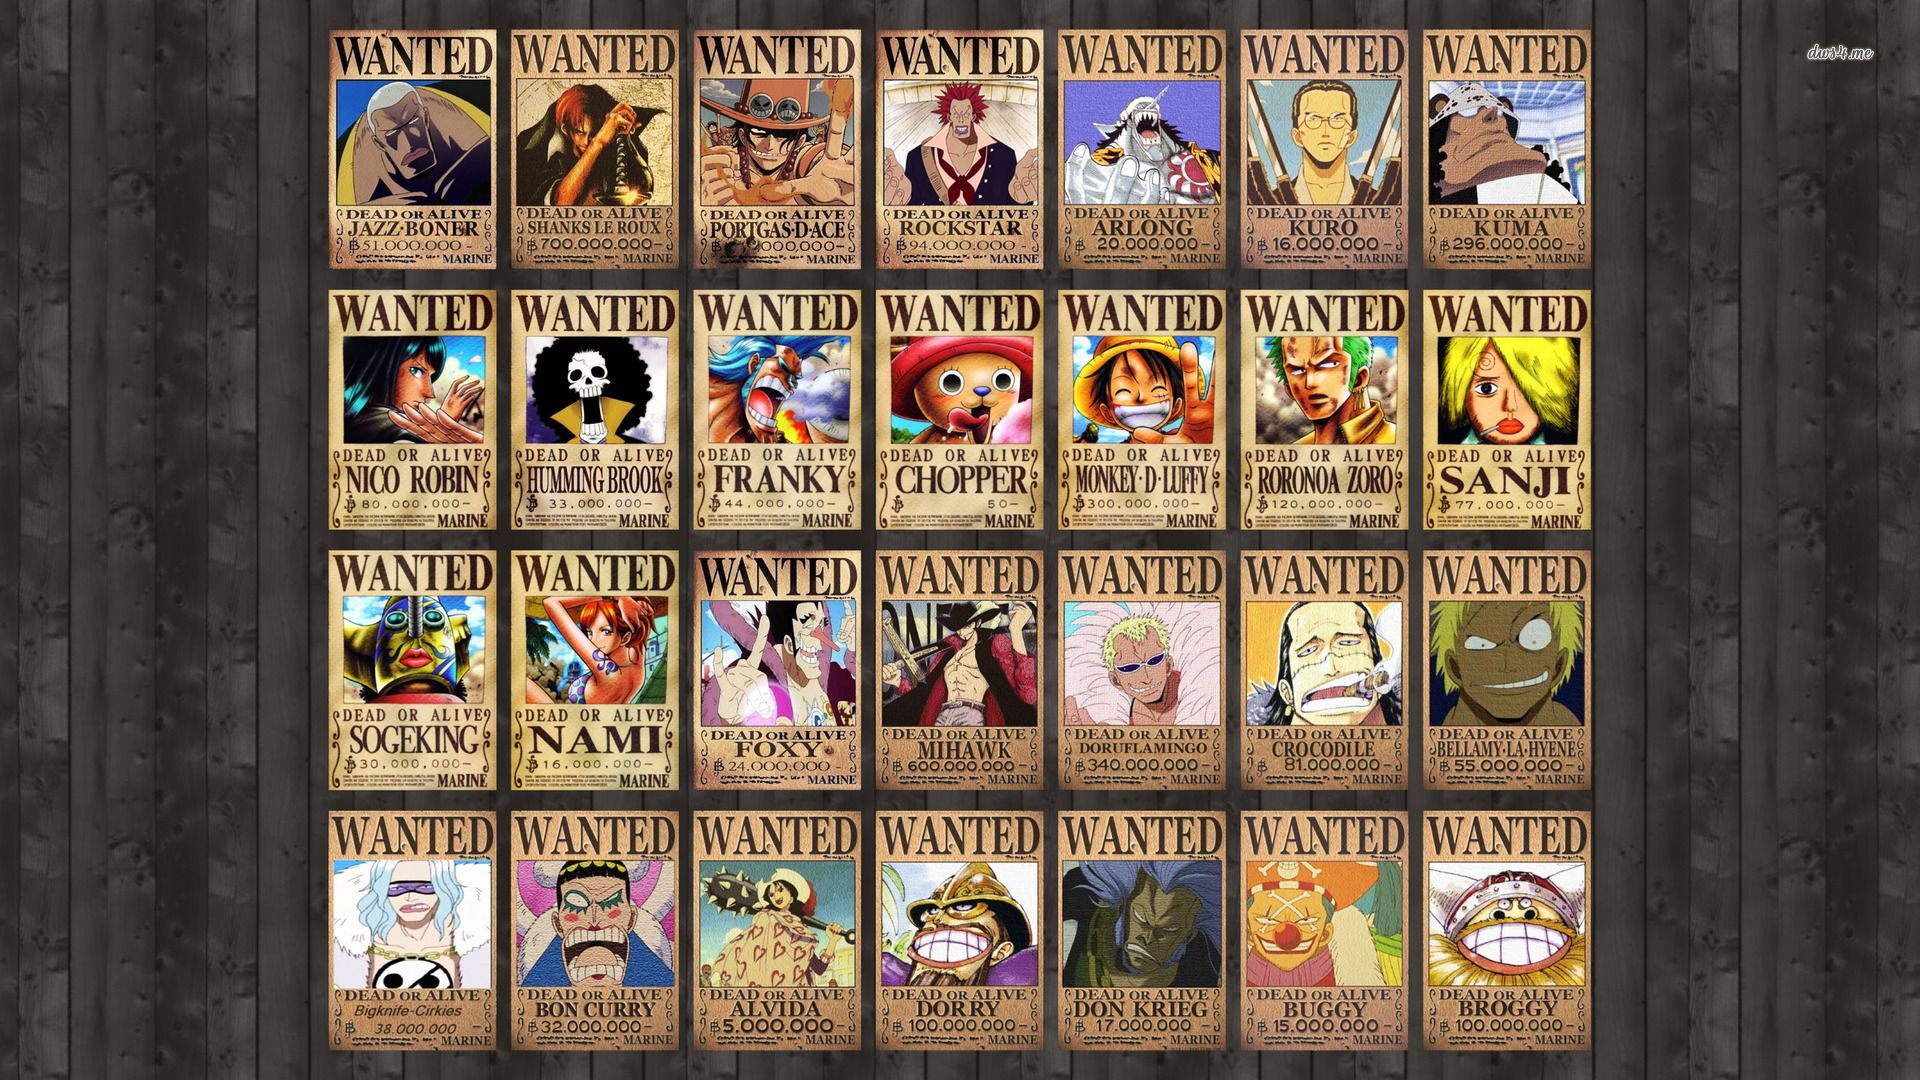 One Piece wanted posters wallpaper - Anime wallpapers